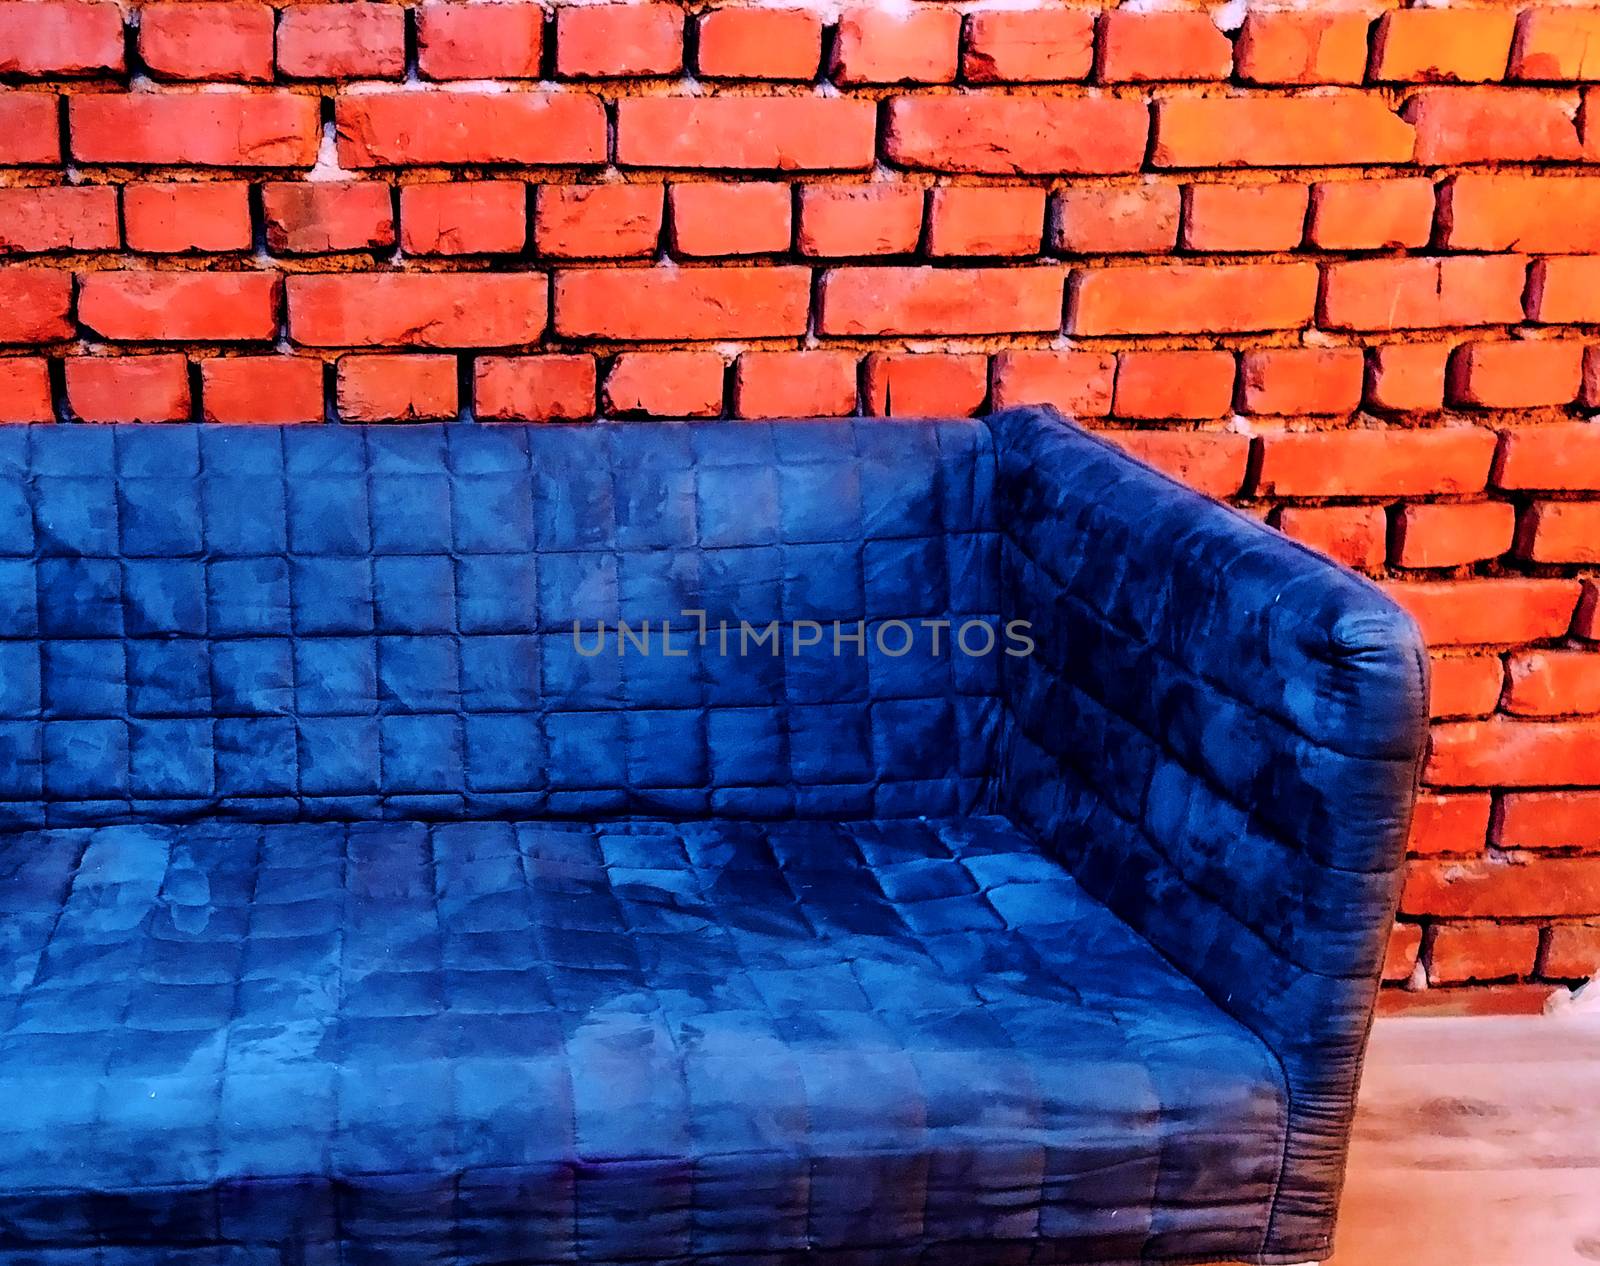 plush puff blue sofa on a brick backgrund vintage industrial style indoor concept